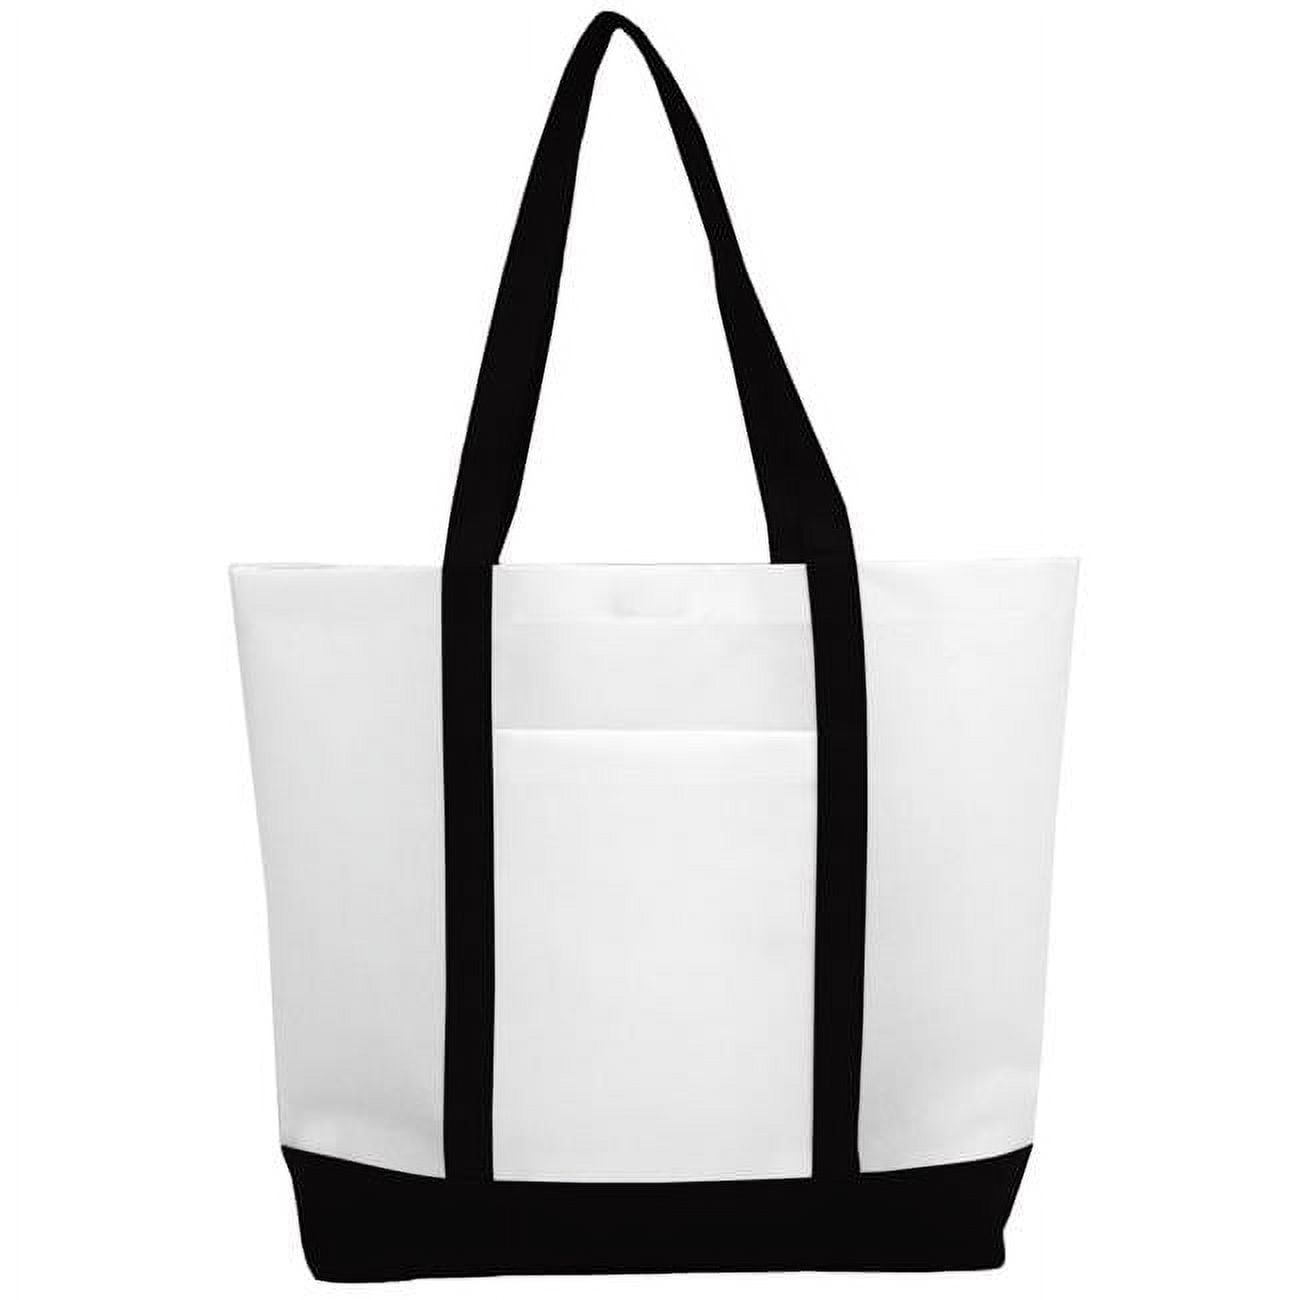 Nw300blk 13 X 5 X 13 In. Non Woven Tote With Pocket, Black - 10 Pack